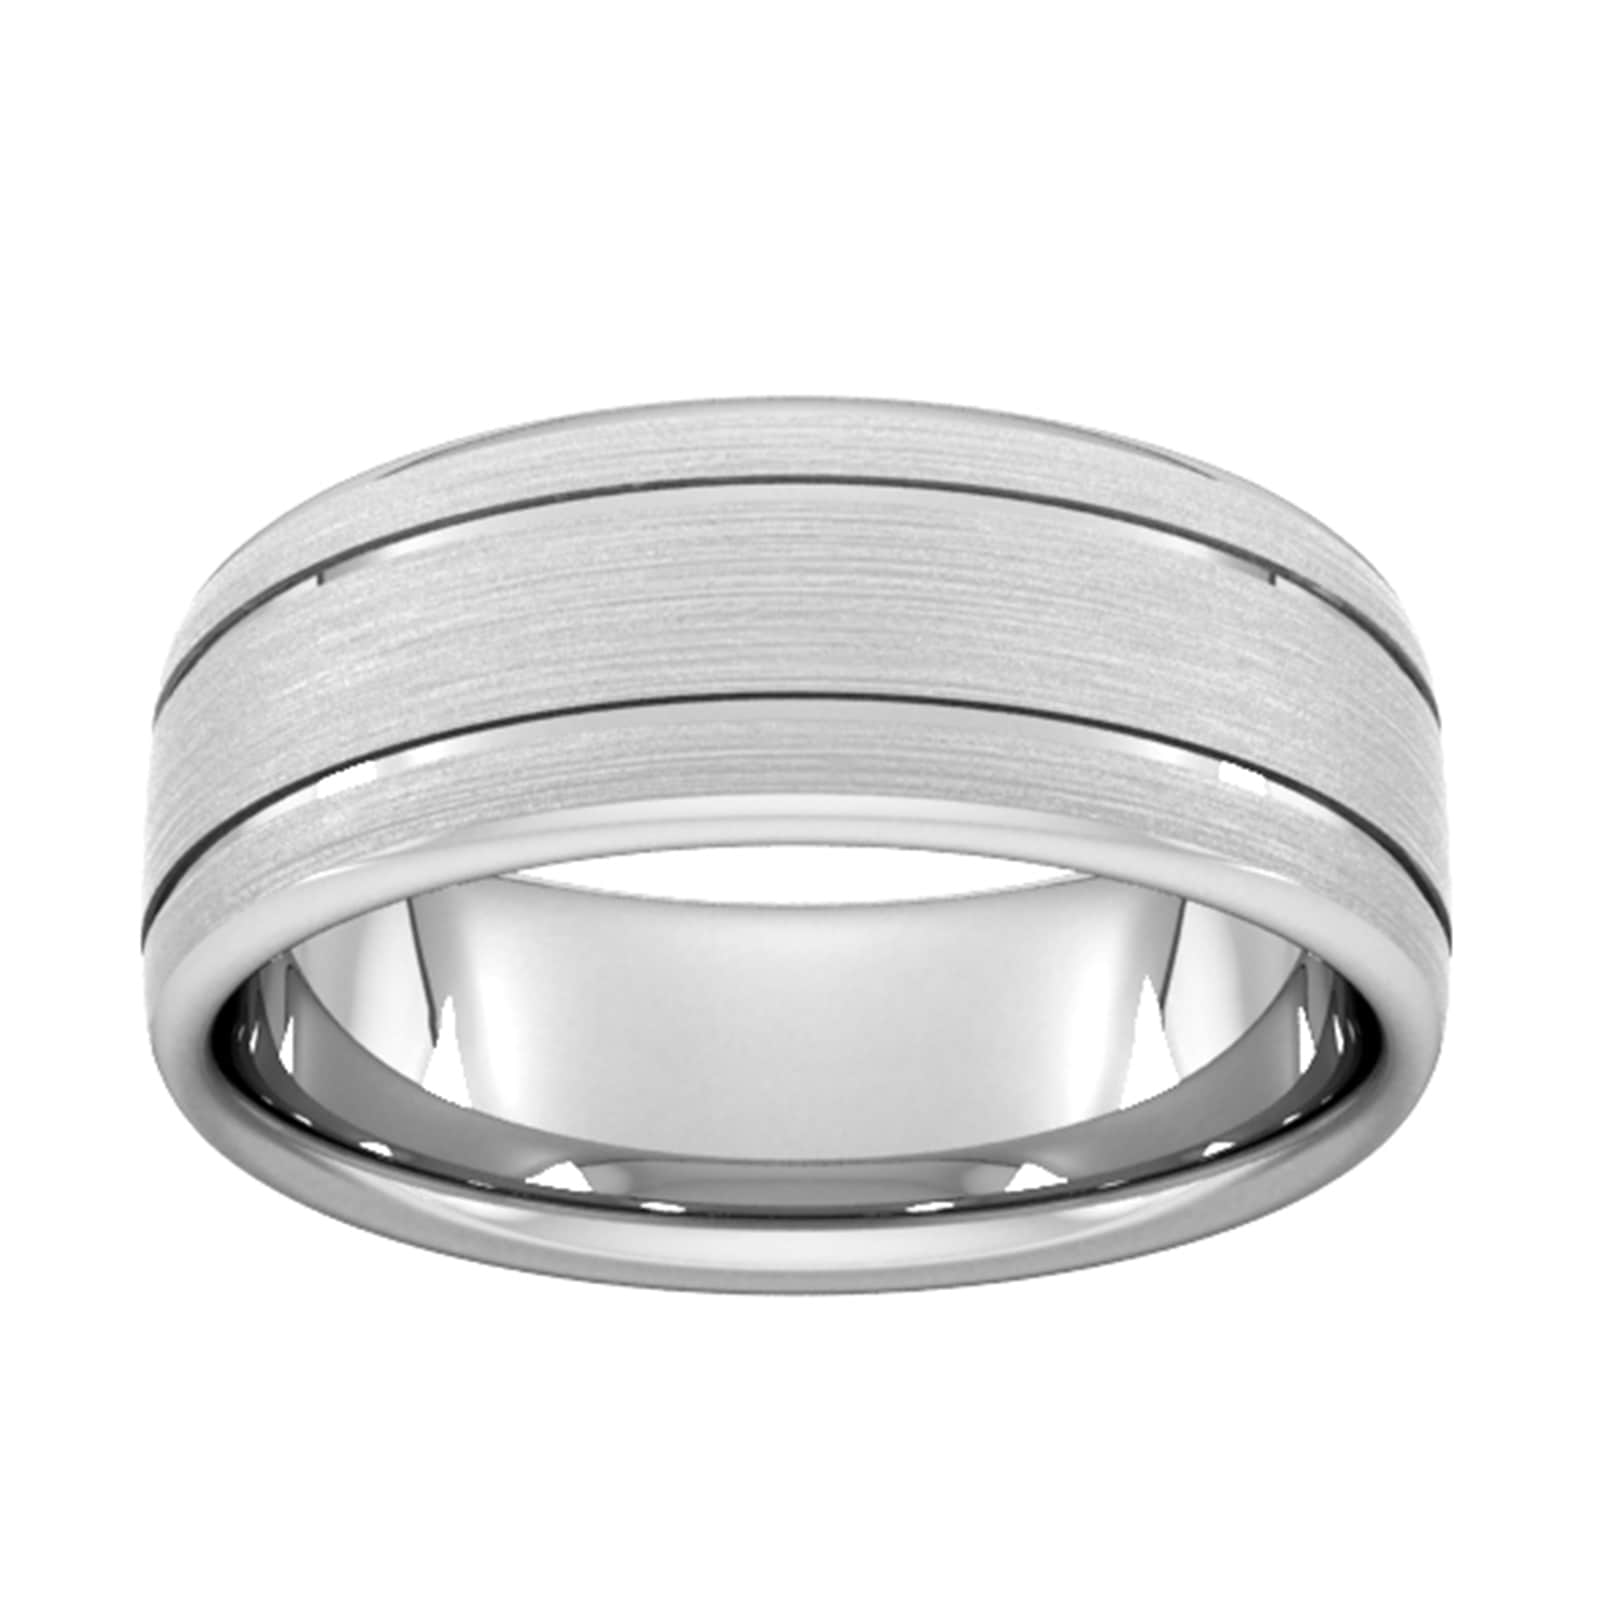 8mm D Shape Heavy Matt Finish With Double Grooves Wedding Ring In 18 Carat White Gold - Ring Size H